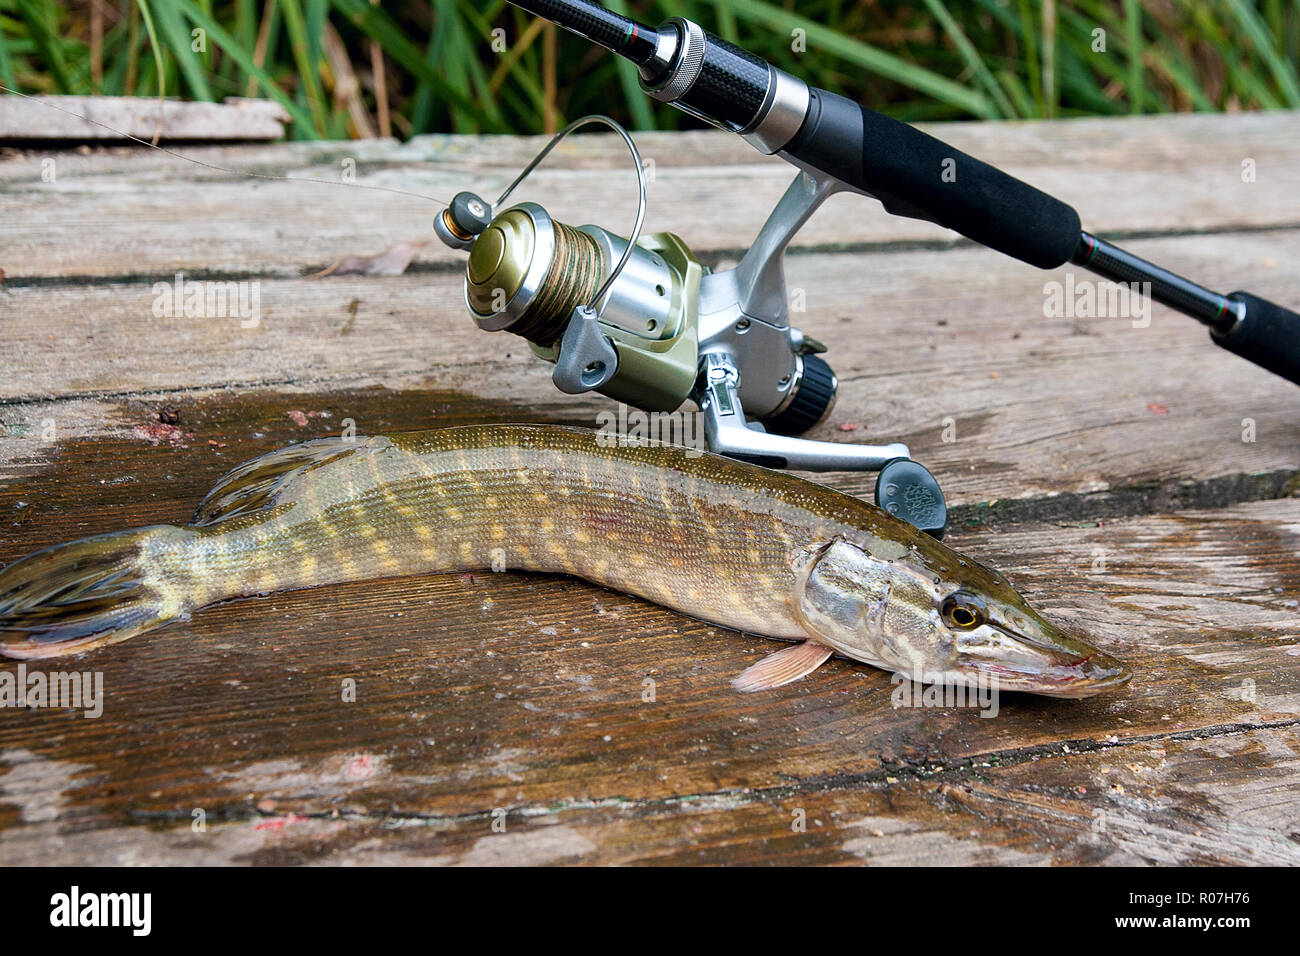 https://c8.alamy.com/comp/R07H76/freshwater-northern-pike-fish-know-as-esox-lucius-and-fishing-rod-with-reel-lying-on-vintage-wooden-background-fishing-concept-good-catch-big-fres-R07H76.jpg